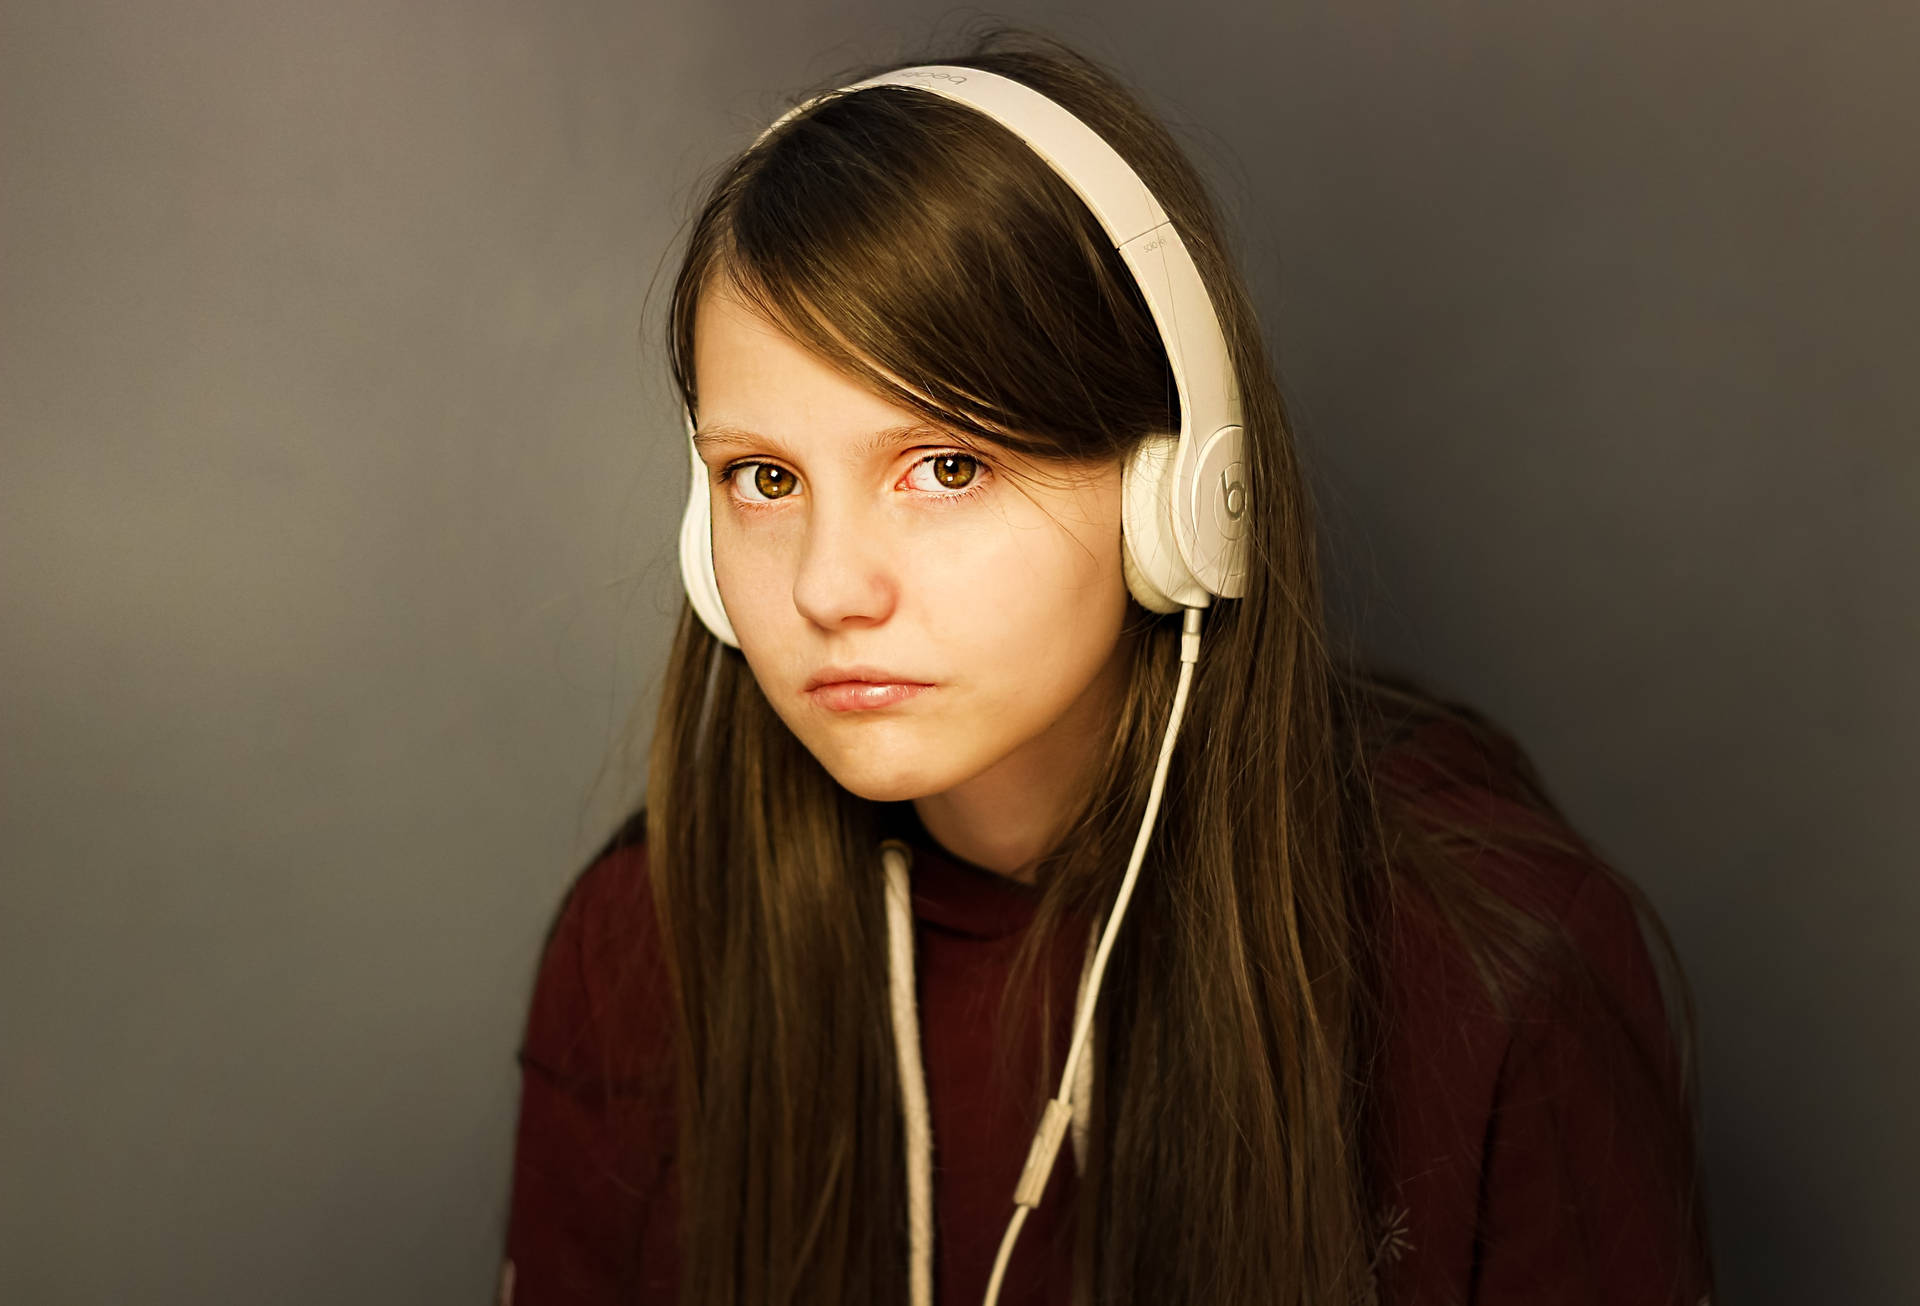 Download Teenage Girl White Headset And Maroon Sweater Wallpaper ...